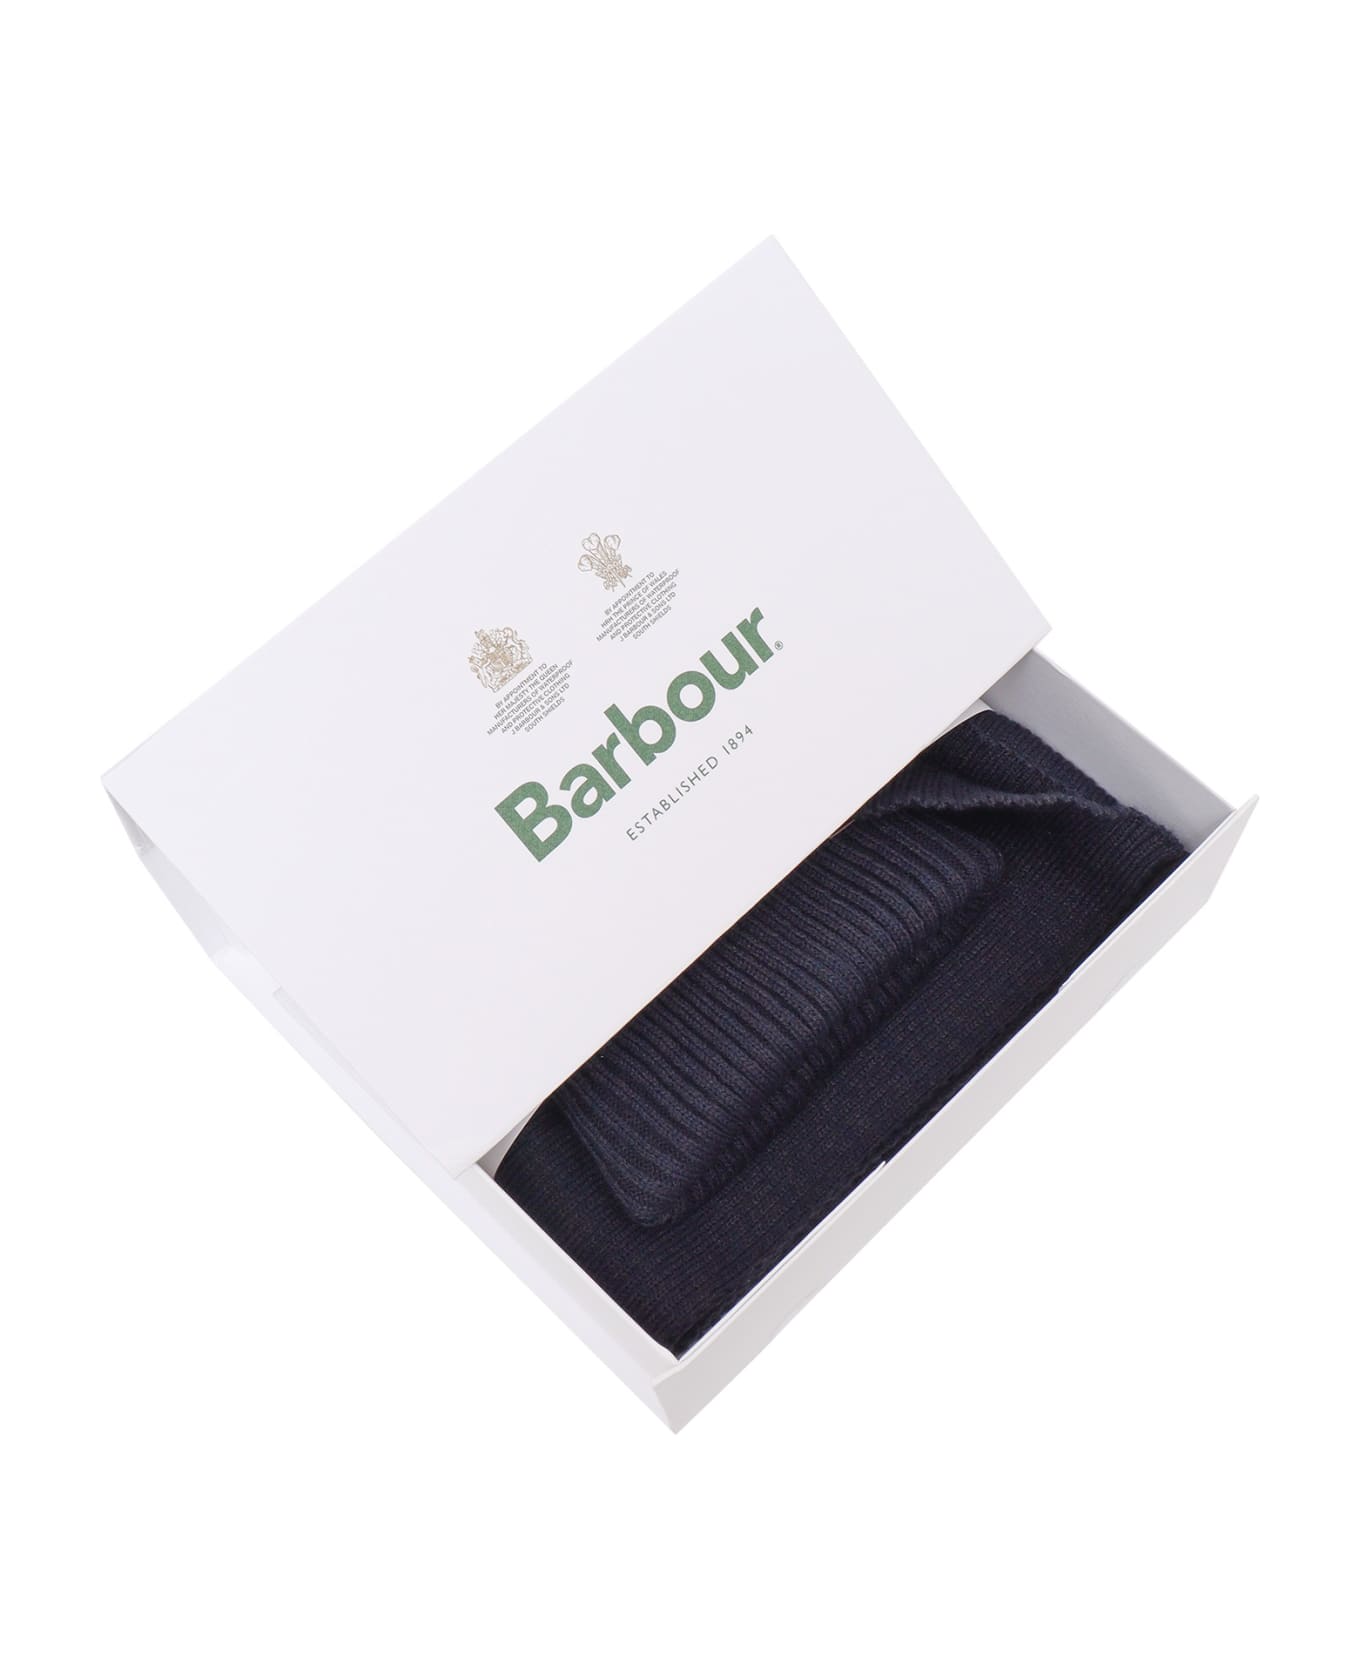 Barbour Scarf And Beanie Set - BLUE